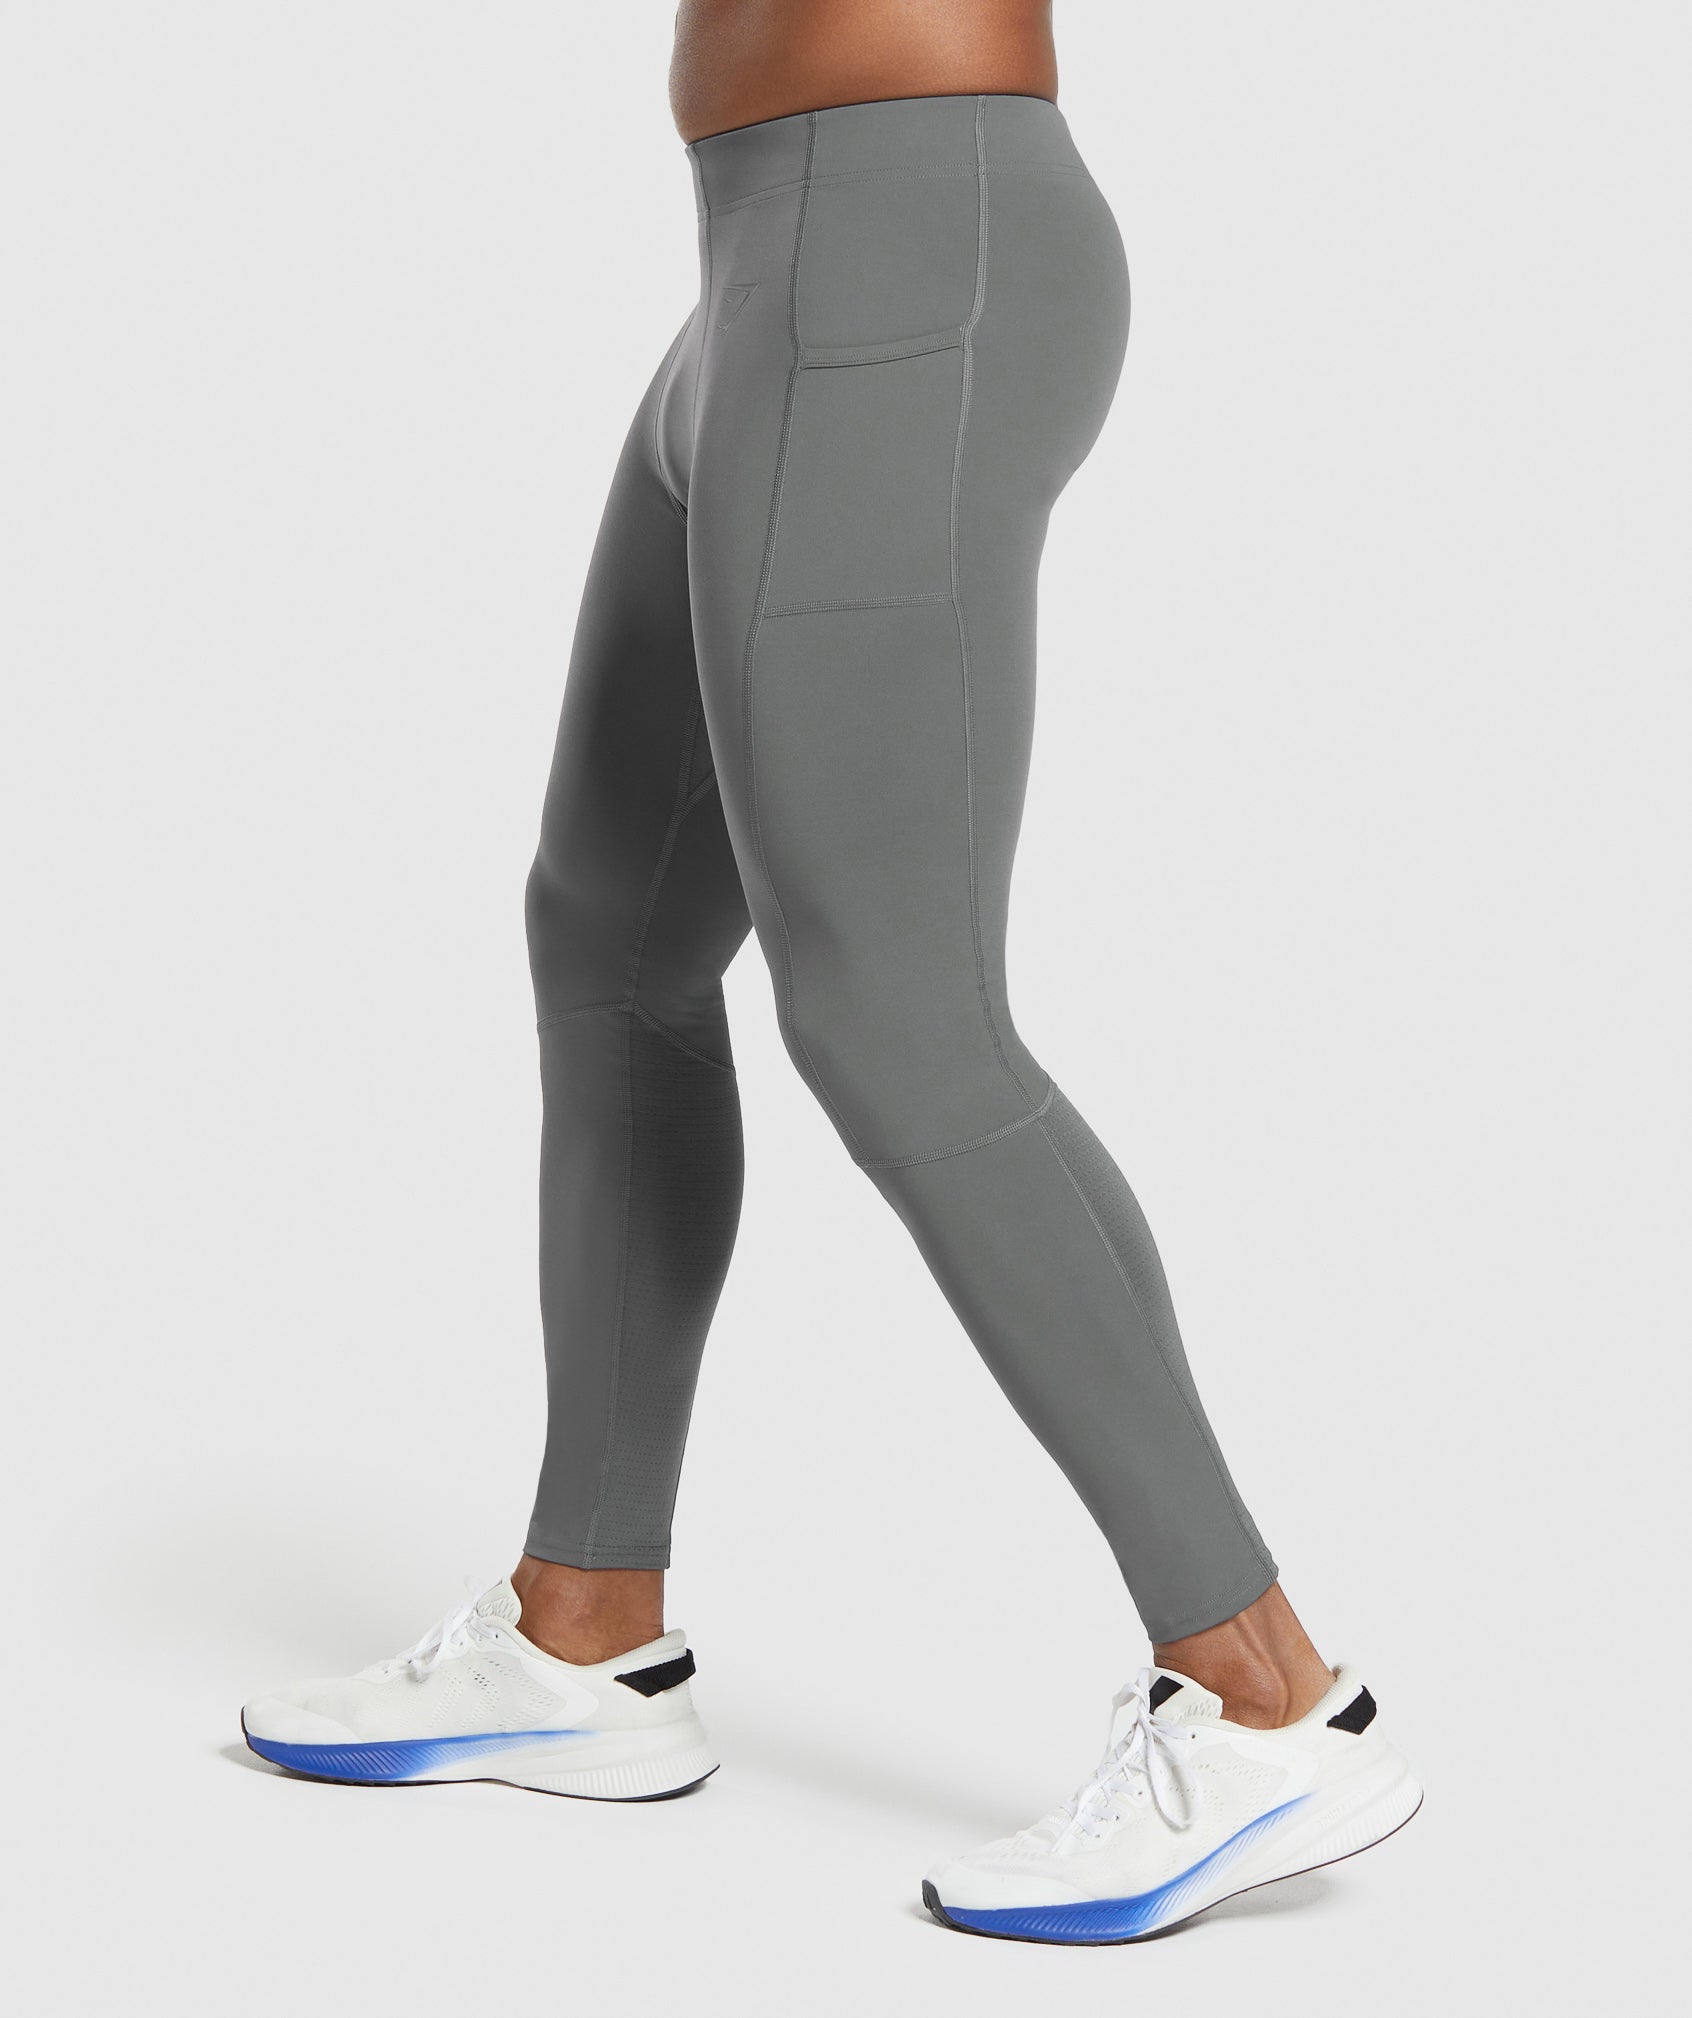 Control Baselayer Legging in Pitch Grey - view 5